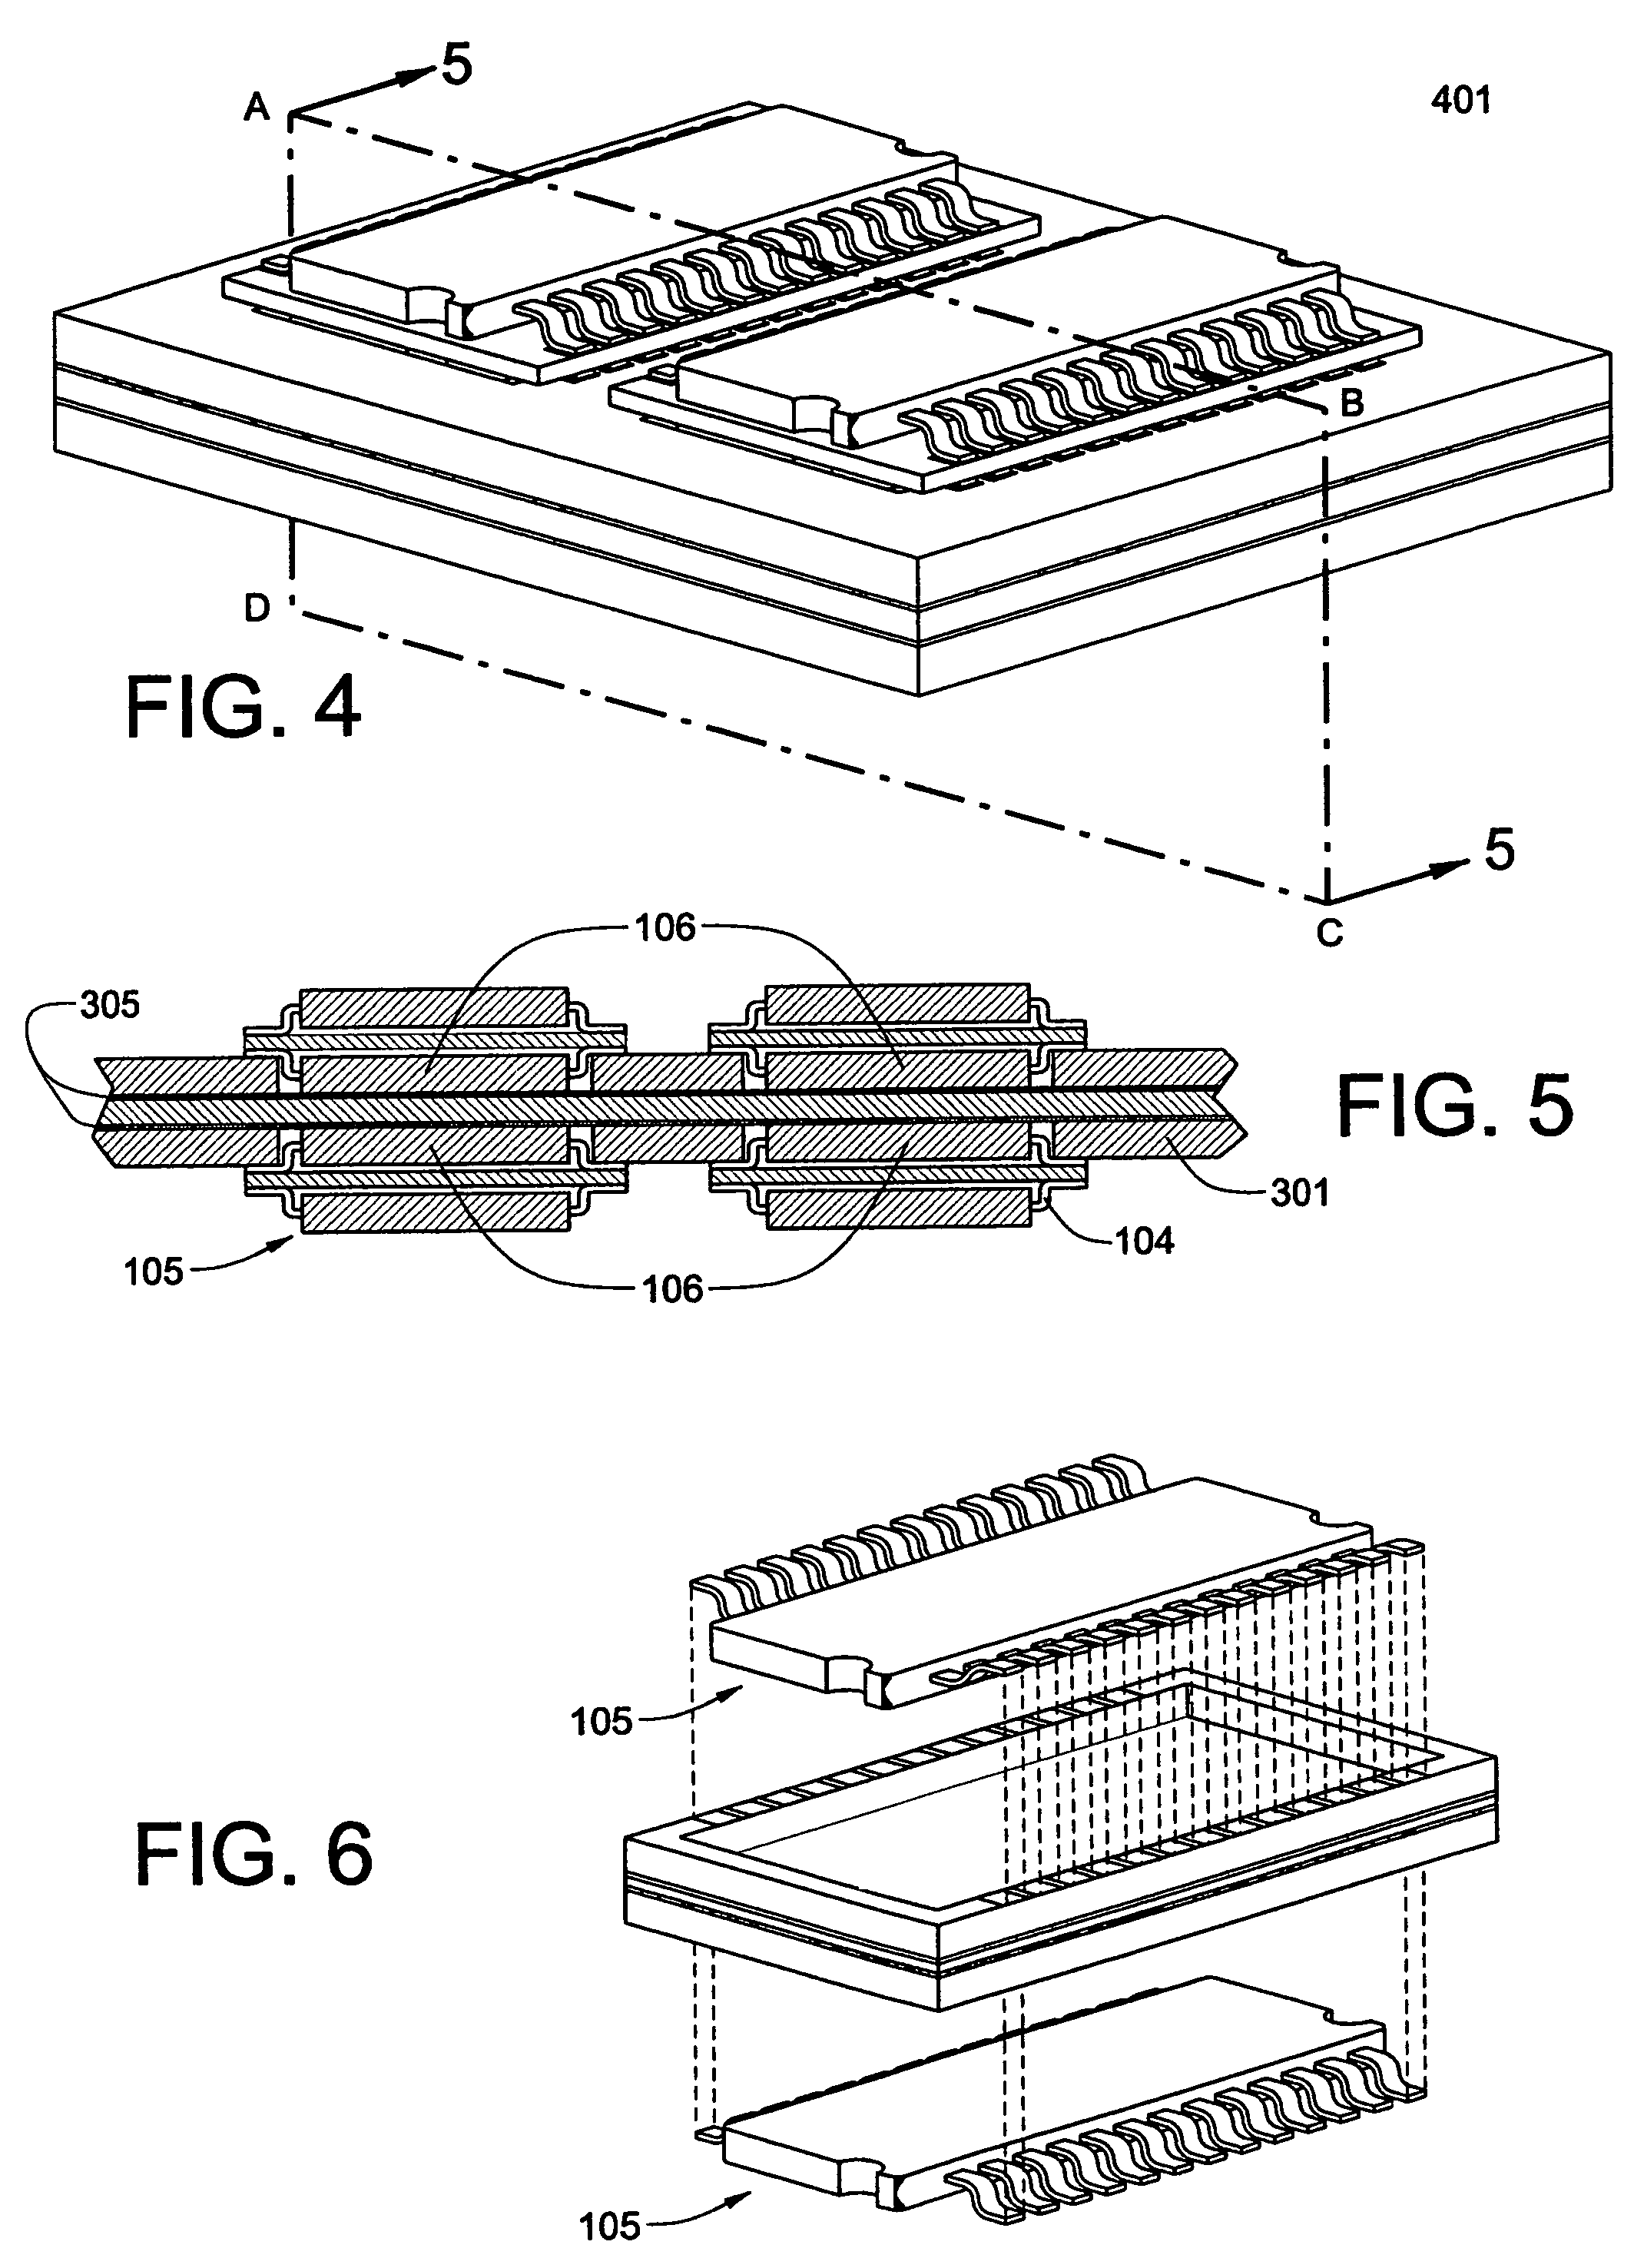 Carrier-based electronic module